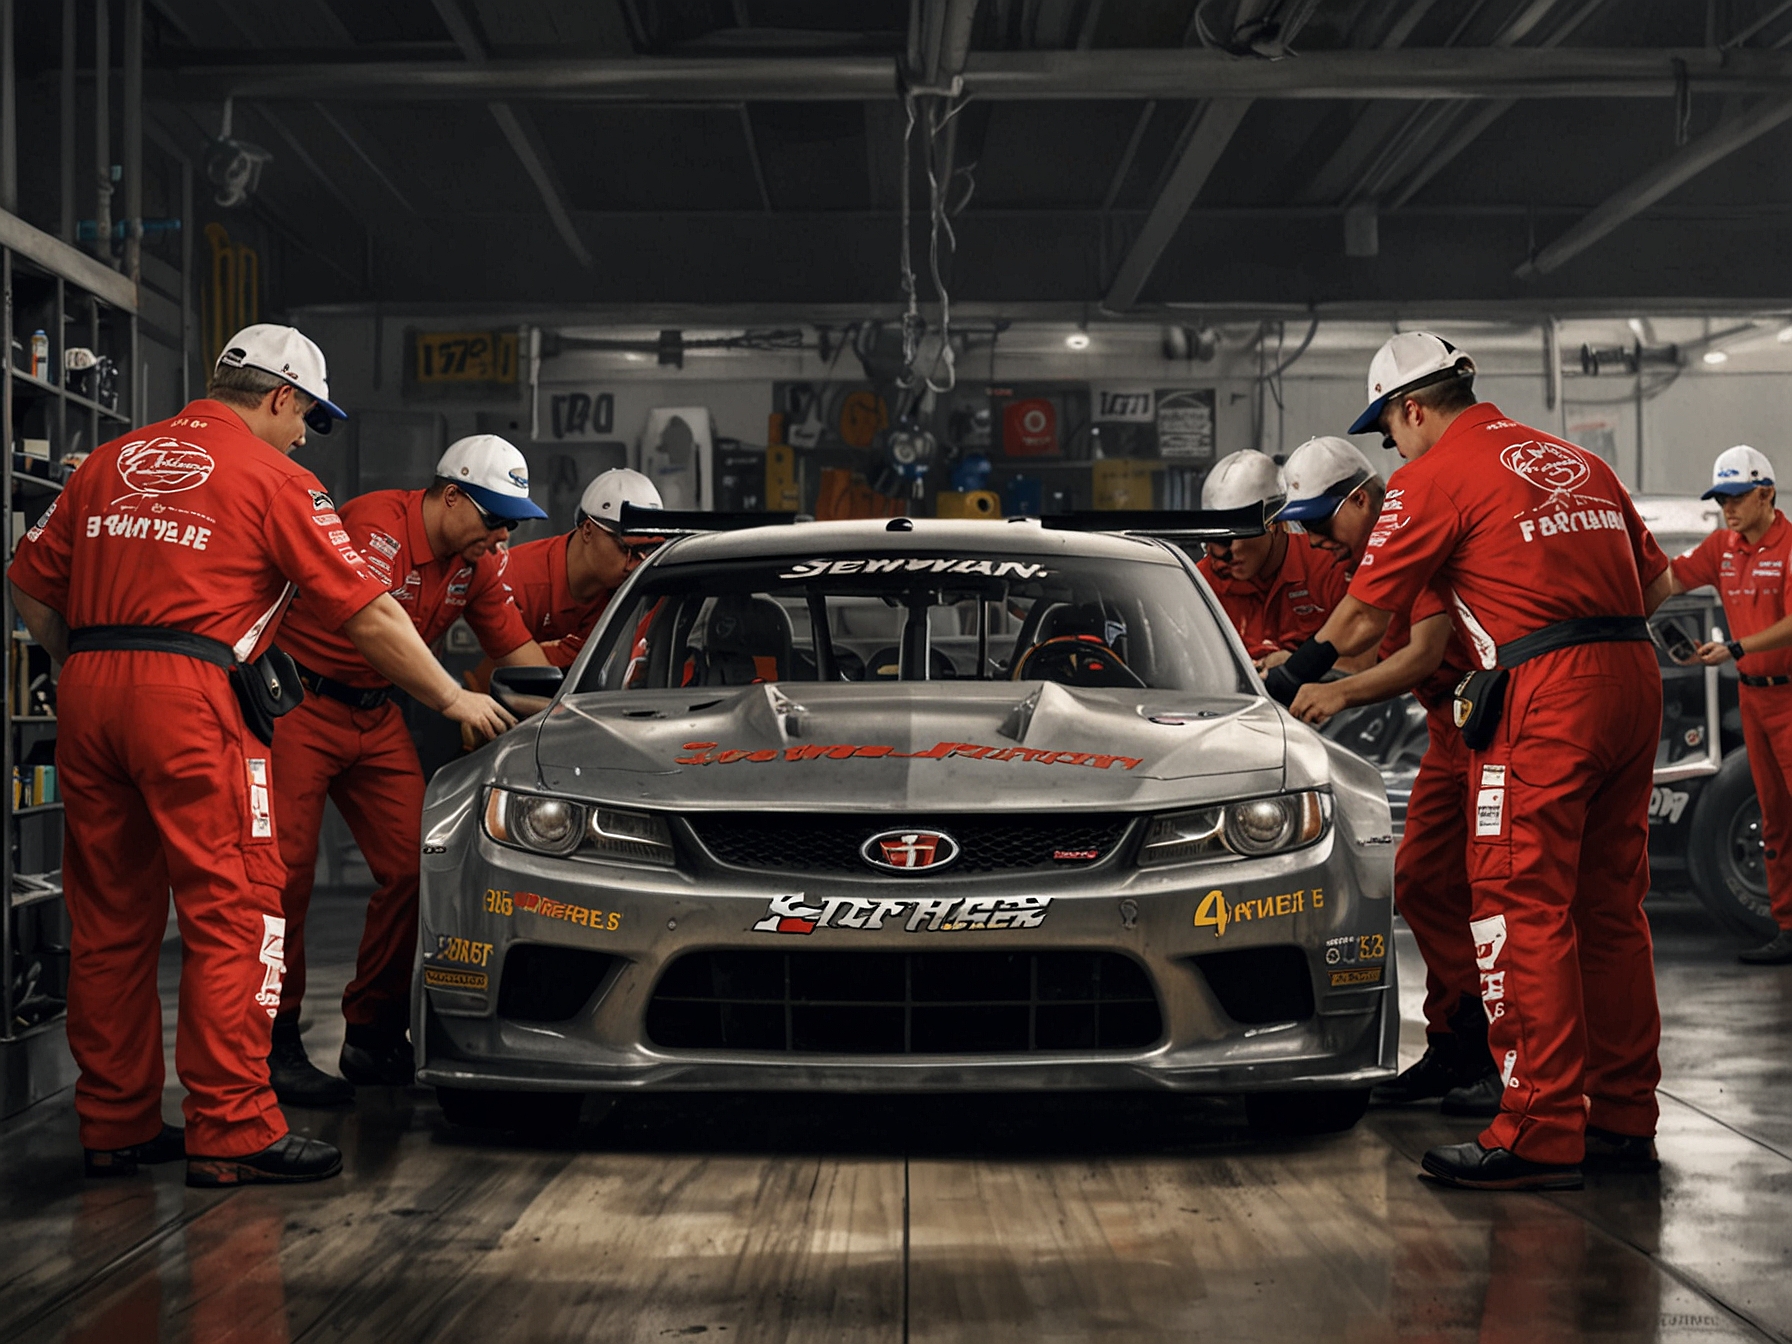 Stewart-Haas Racing's iconic pit crew working meticulously on a car, symbolizing the team's long-standing presence and its imminent closure impacting drivers like Noah Gragson.